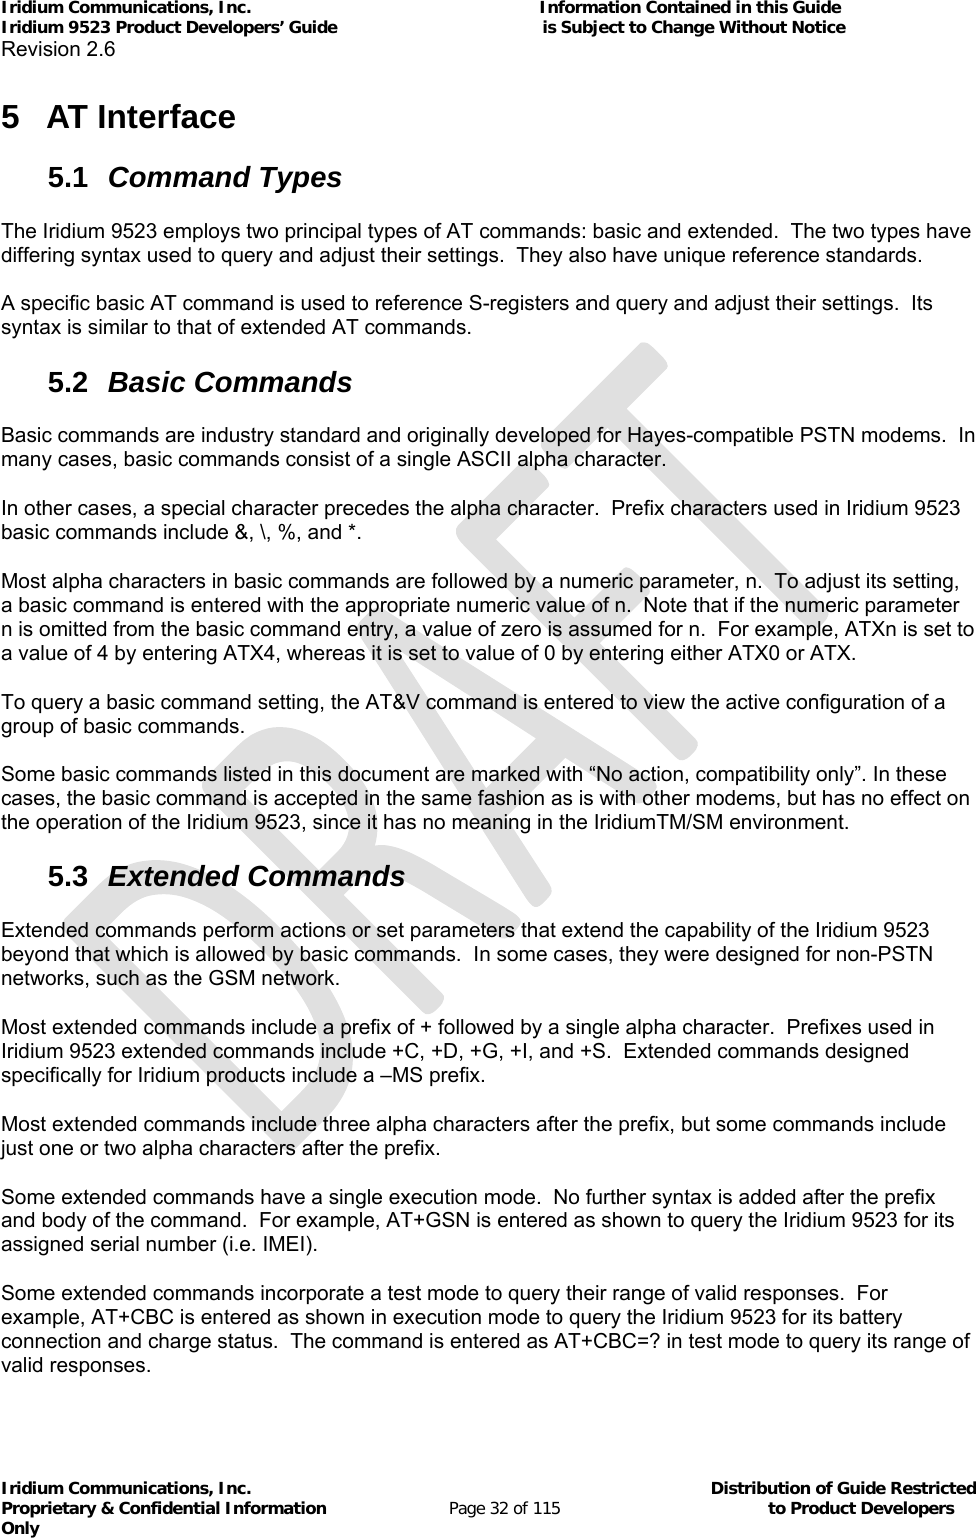 Iridium Communications, Inc.                                                           Information Contained in this Guide  Iridium 9523 Product Developers’ Guide                                          is Subject to Change Without Notice  Revision 2.6 Iridium Communications, Inc.                                          Distribution of Guide Restricted Proprietary &amp; Confidential Information                         Page 32 of 115                                        to Product Developers Only           5 AT Interface 5.1  Command Types The Iridium 9523 employs two principal types of AT commands: basic and extended.  The two types have differing syntax used to query and adjust their settings.  They also have unique reference standards. A specific basic AT command is used to reference S-registers and query and adjust their settings.  Its syntax is similar to that of extended AT commands. 5.2  Basic Commands Basic commands are industry standard and originally developed for Hayes-compatible PSTN modems.  In many cases, basic commands consist of a single ASCII alpha character. In other cases, a special character precedes the alpha character.  Prefix characters used in Iridium 9523 basic commands include &amp;, \, %, and *. Most alpha characters in basic commands are followed by a numeric parameter, n.  To adjust its setting, a basic command is entered with the appropriate numeric value of n.  Note that if the numeric parameter n is omitted from the basic command entry, a value of zero is assumed for n.  For example, ATXn is set to a value of 4 by entering ATX4, whereas it is set to value of 0 by entering either ATX0 or ATX. To query a basic command setting, the AT&amp;V command is entered to view the active configuration of a group of basic commands. Some basic commands listed in this document are marked with “No action, compatibility only”. In these cases, the basic command is accepted in the same fashion as is with other modems, but has no effect on the operation of the Iridium 9523, since it has no meaning in the IridiumTM/SM environment. 5.3  Extended Commands Extended commands perform actions or set parameters that extend the capability of the Iridium 9523 beyond that which is allowed by basic commands.  In some cases, they were designed for non-PSTN networks, such as the GSM network. Most extended commands include a prefix of + followed by a single alpha character.  Prefixes used in Iridium 9523 extended commands include +C, +D, +G, +I, and +S.  Extended commands designed specifically for Iridium products include a –MS prefix. Most extended commands include three alpha characters after the prefix, but some commands include just one or two alpha characters after the prefix. Some extended commands have a single execution mode.  No further syntax is added after the prefix and body of the command.  For example, AT+GSN is entered as shown to query the Iridium 9523 for its assigned serial number (i.e. IMEI). Some extended commands incorporate a test mode to query their range of valid responses.  For example, AT+CBC is entered as shown in execution mode to query the Iridium 9523 for its battery connection and charge status.  The command is entered as AT+CBC=? in test mode to query its range of valid responses. 